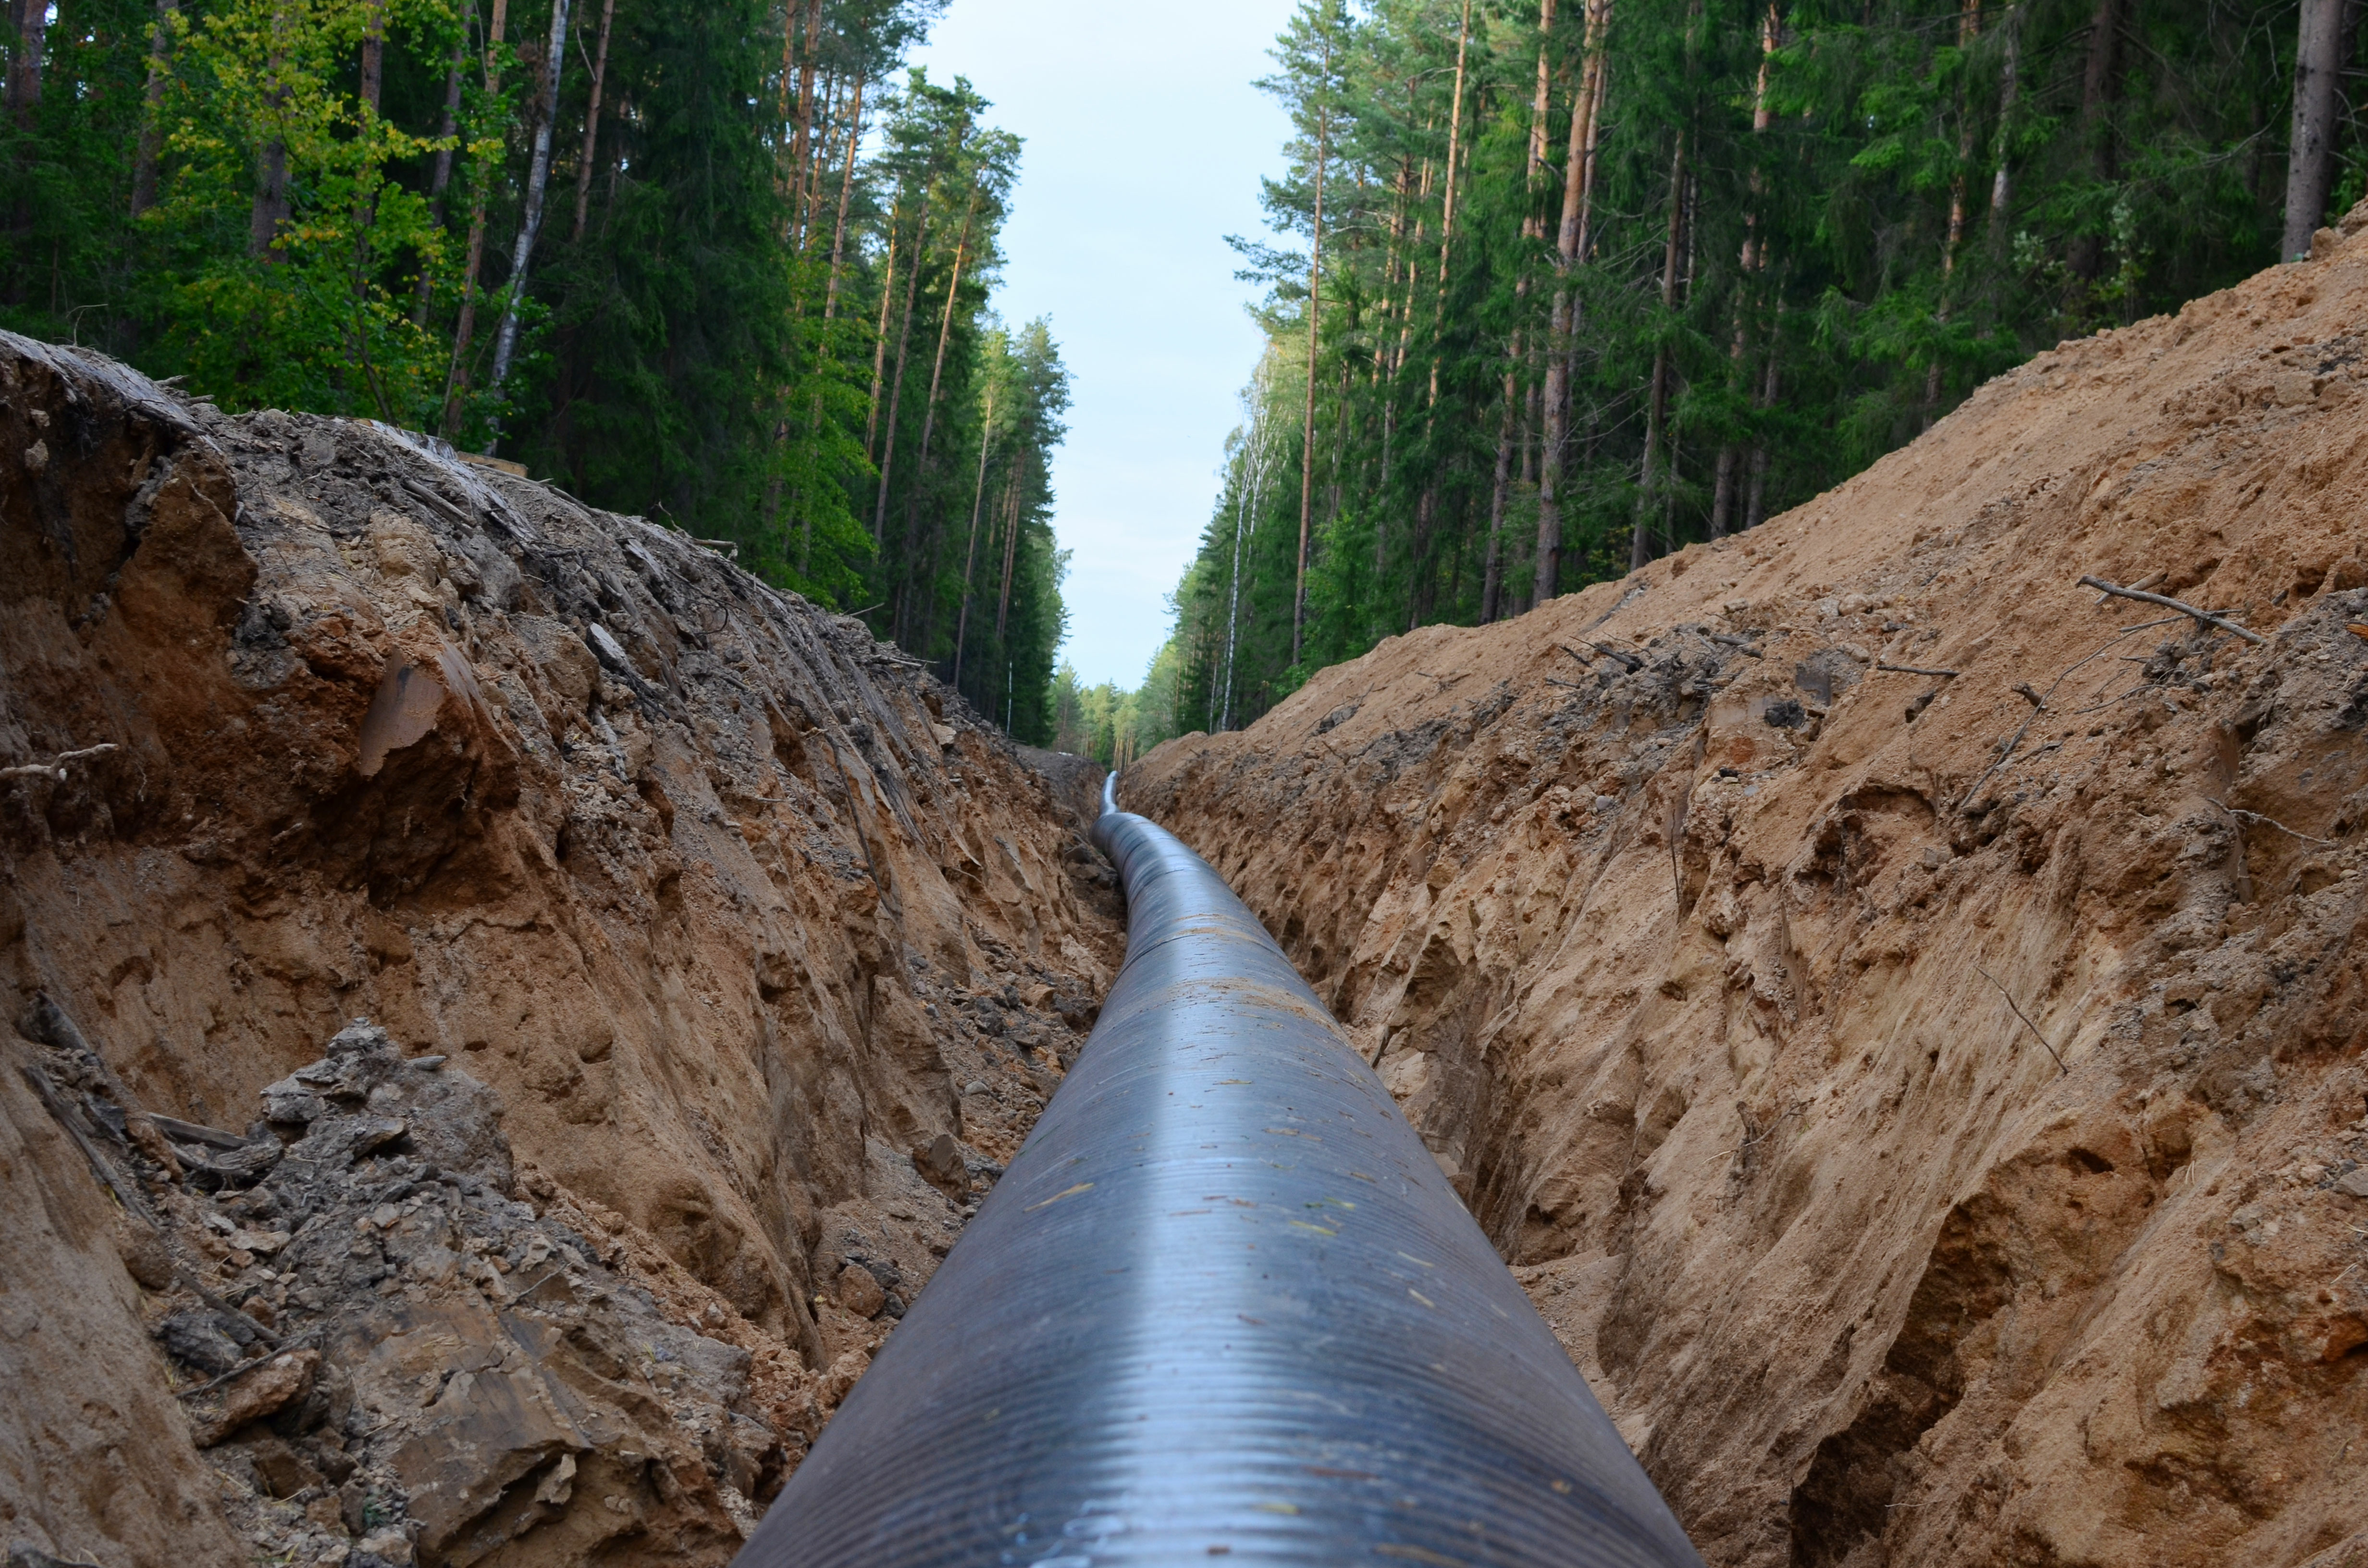 Pipeline in rocky trench with forest on either side.